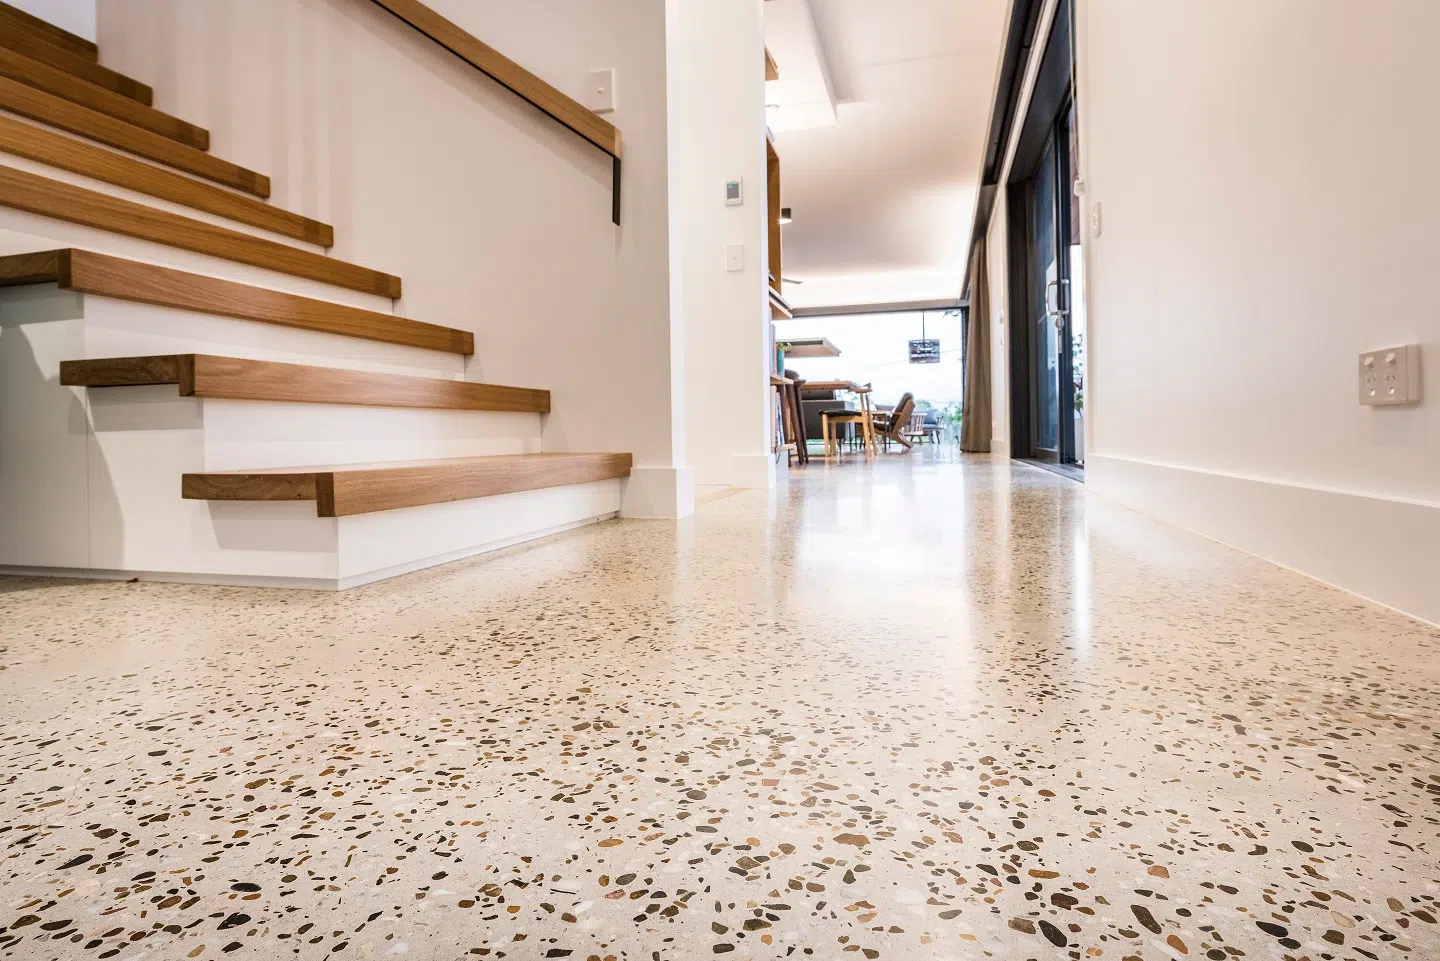 The Toughness of Concrete Flooring